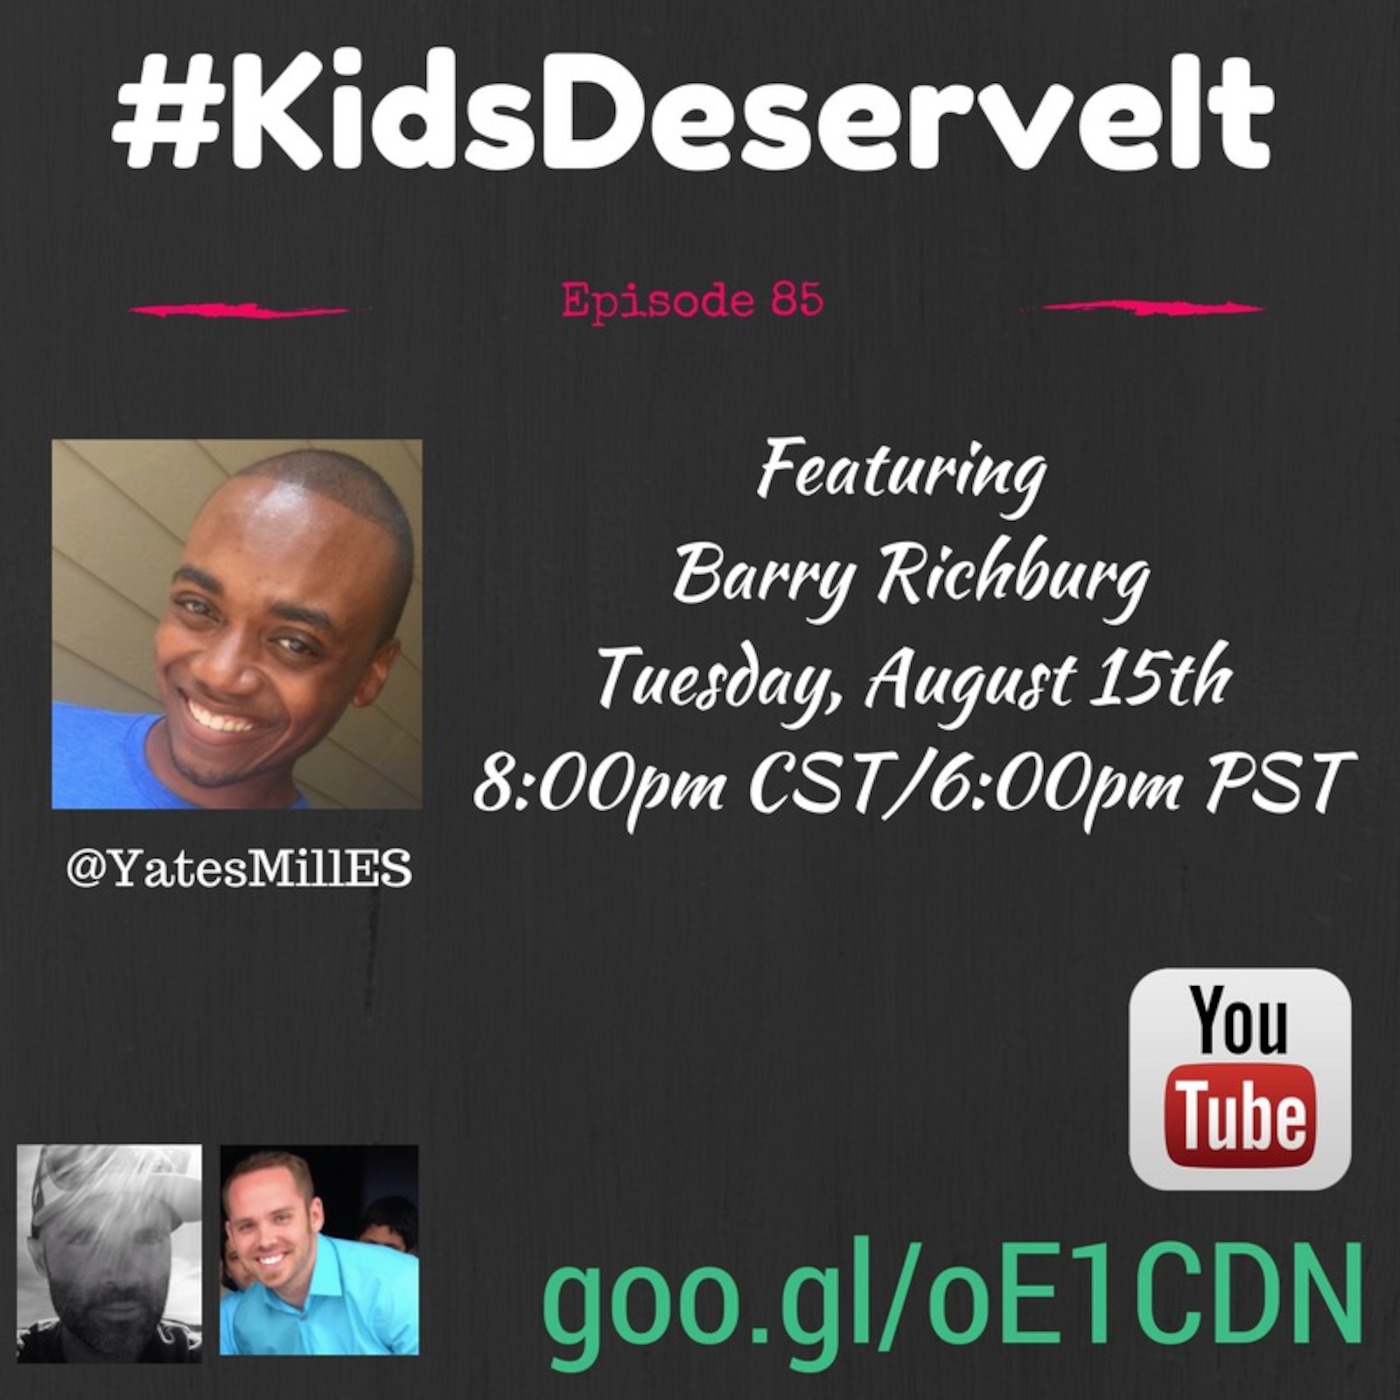 Episode 85 of #KidsDeserveIt with Barry Richburg